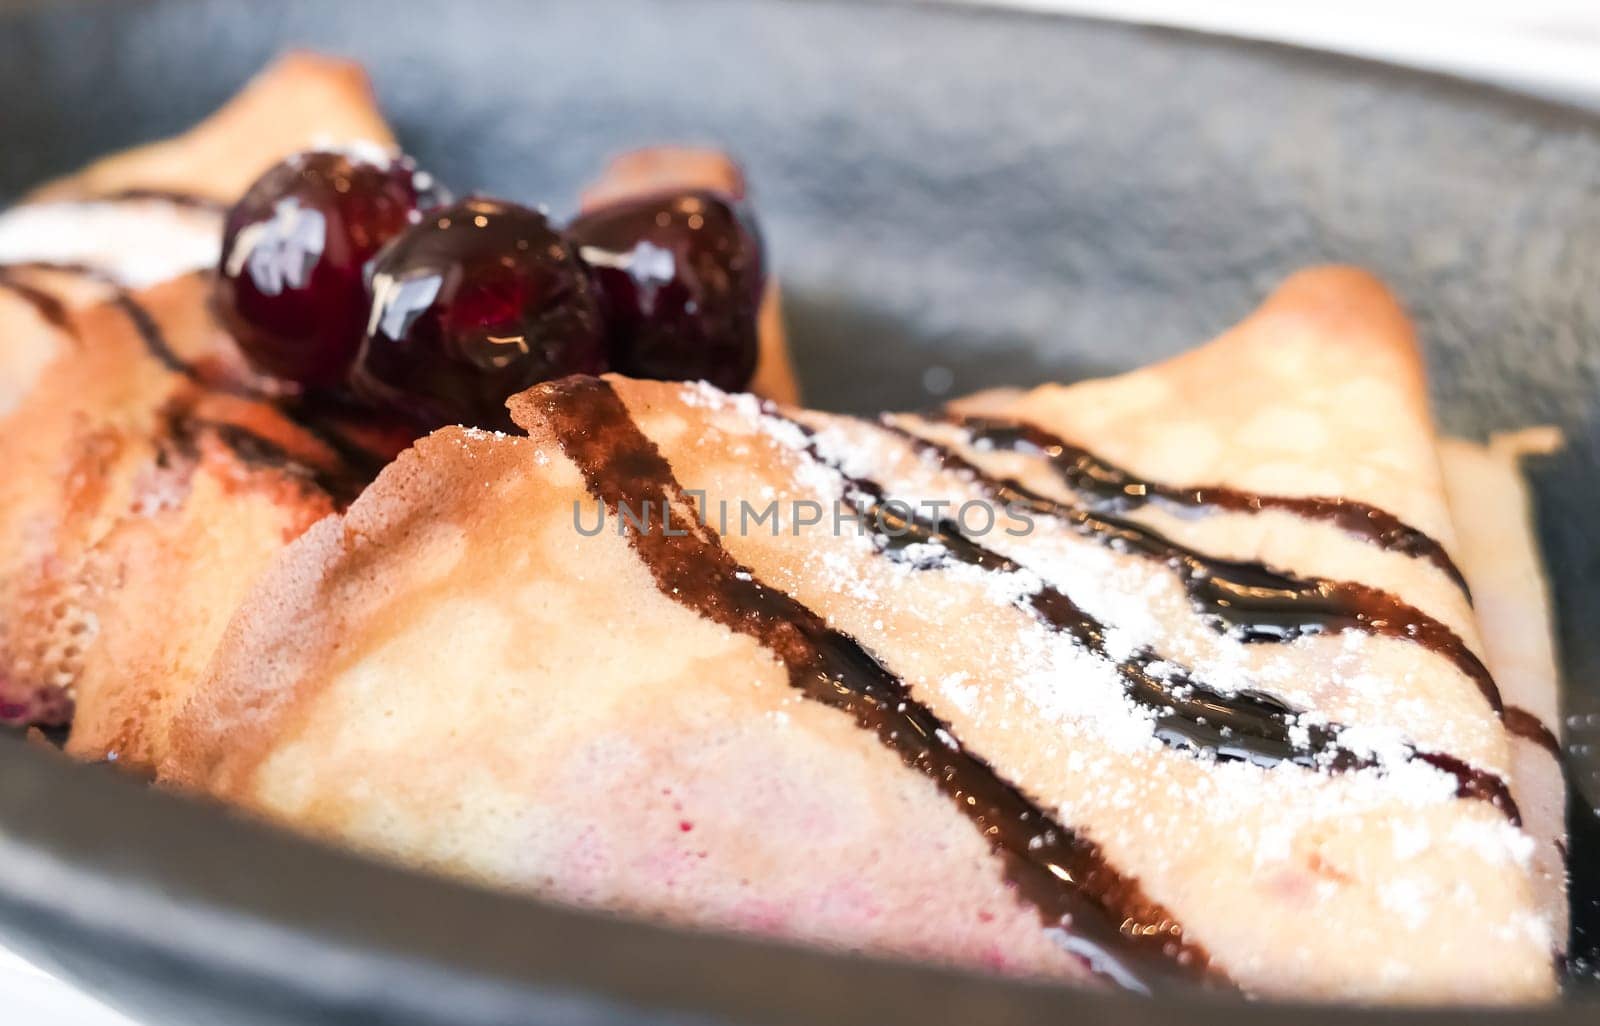 French crepes with chocolate sauce and cherries in a reastaurant in Paris, pancakes recipe by Anneleven